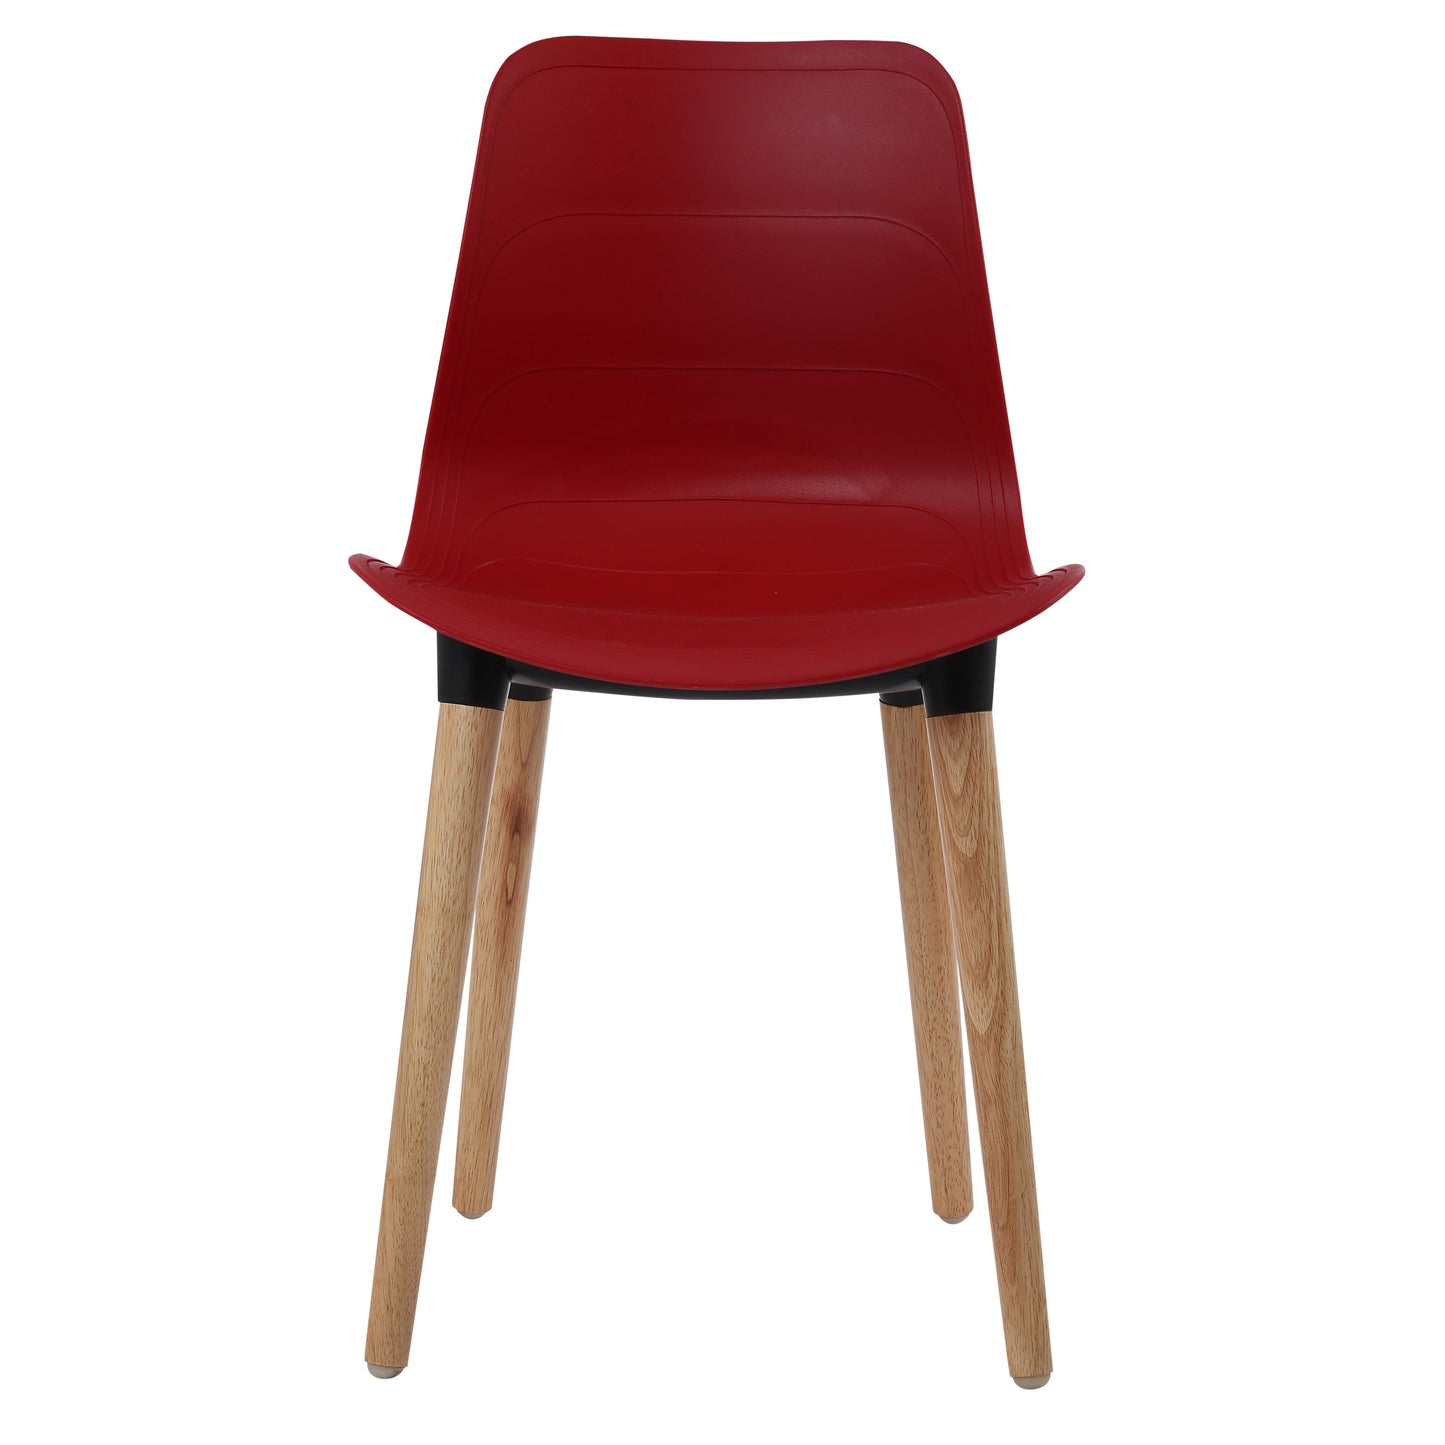 Plastic Chairs With Wood Legs For Cafe and Dining HIFUWA-G (Dark Red)